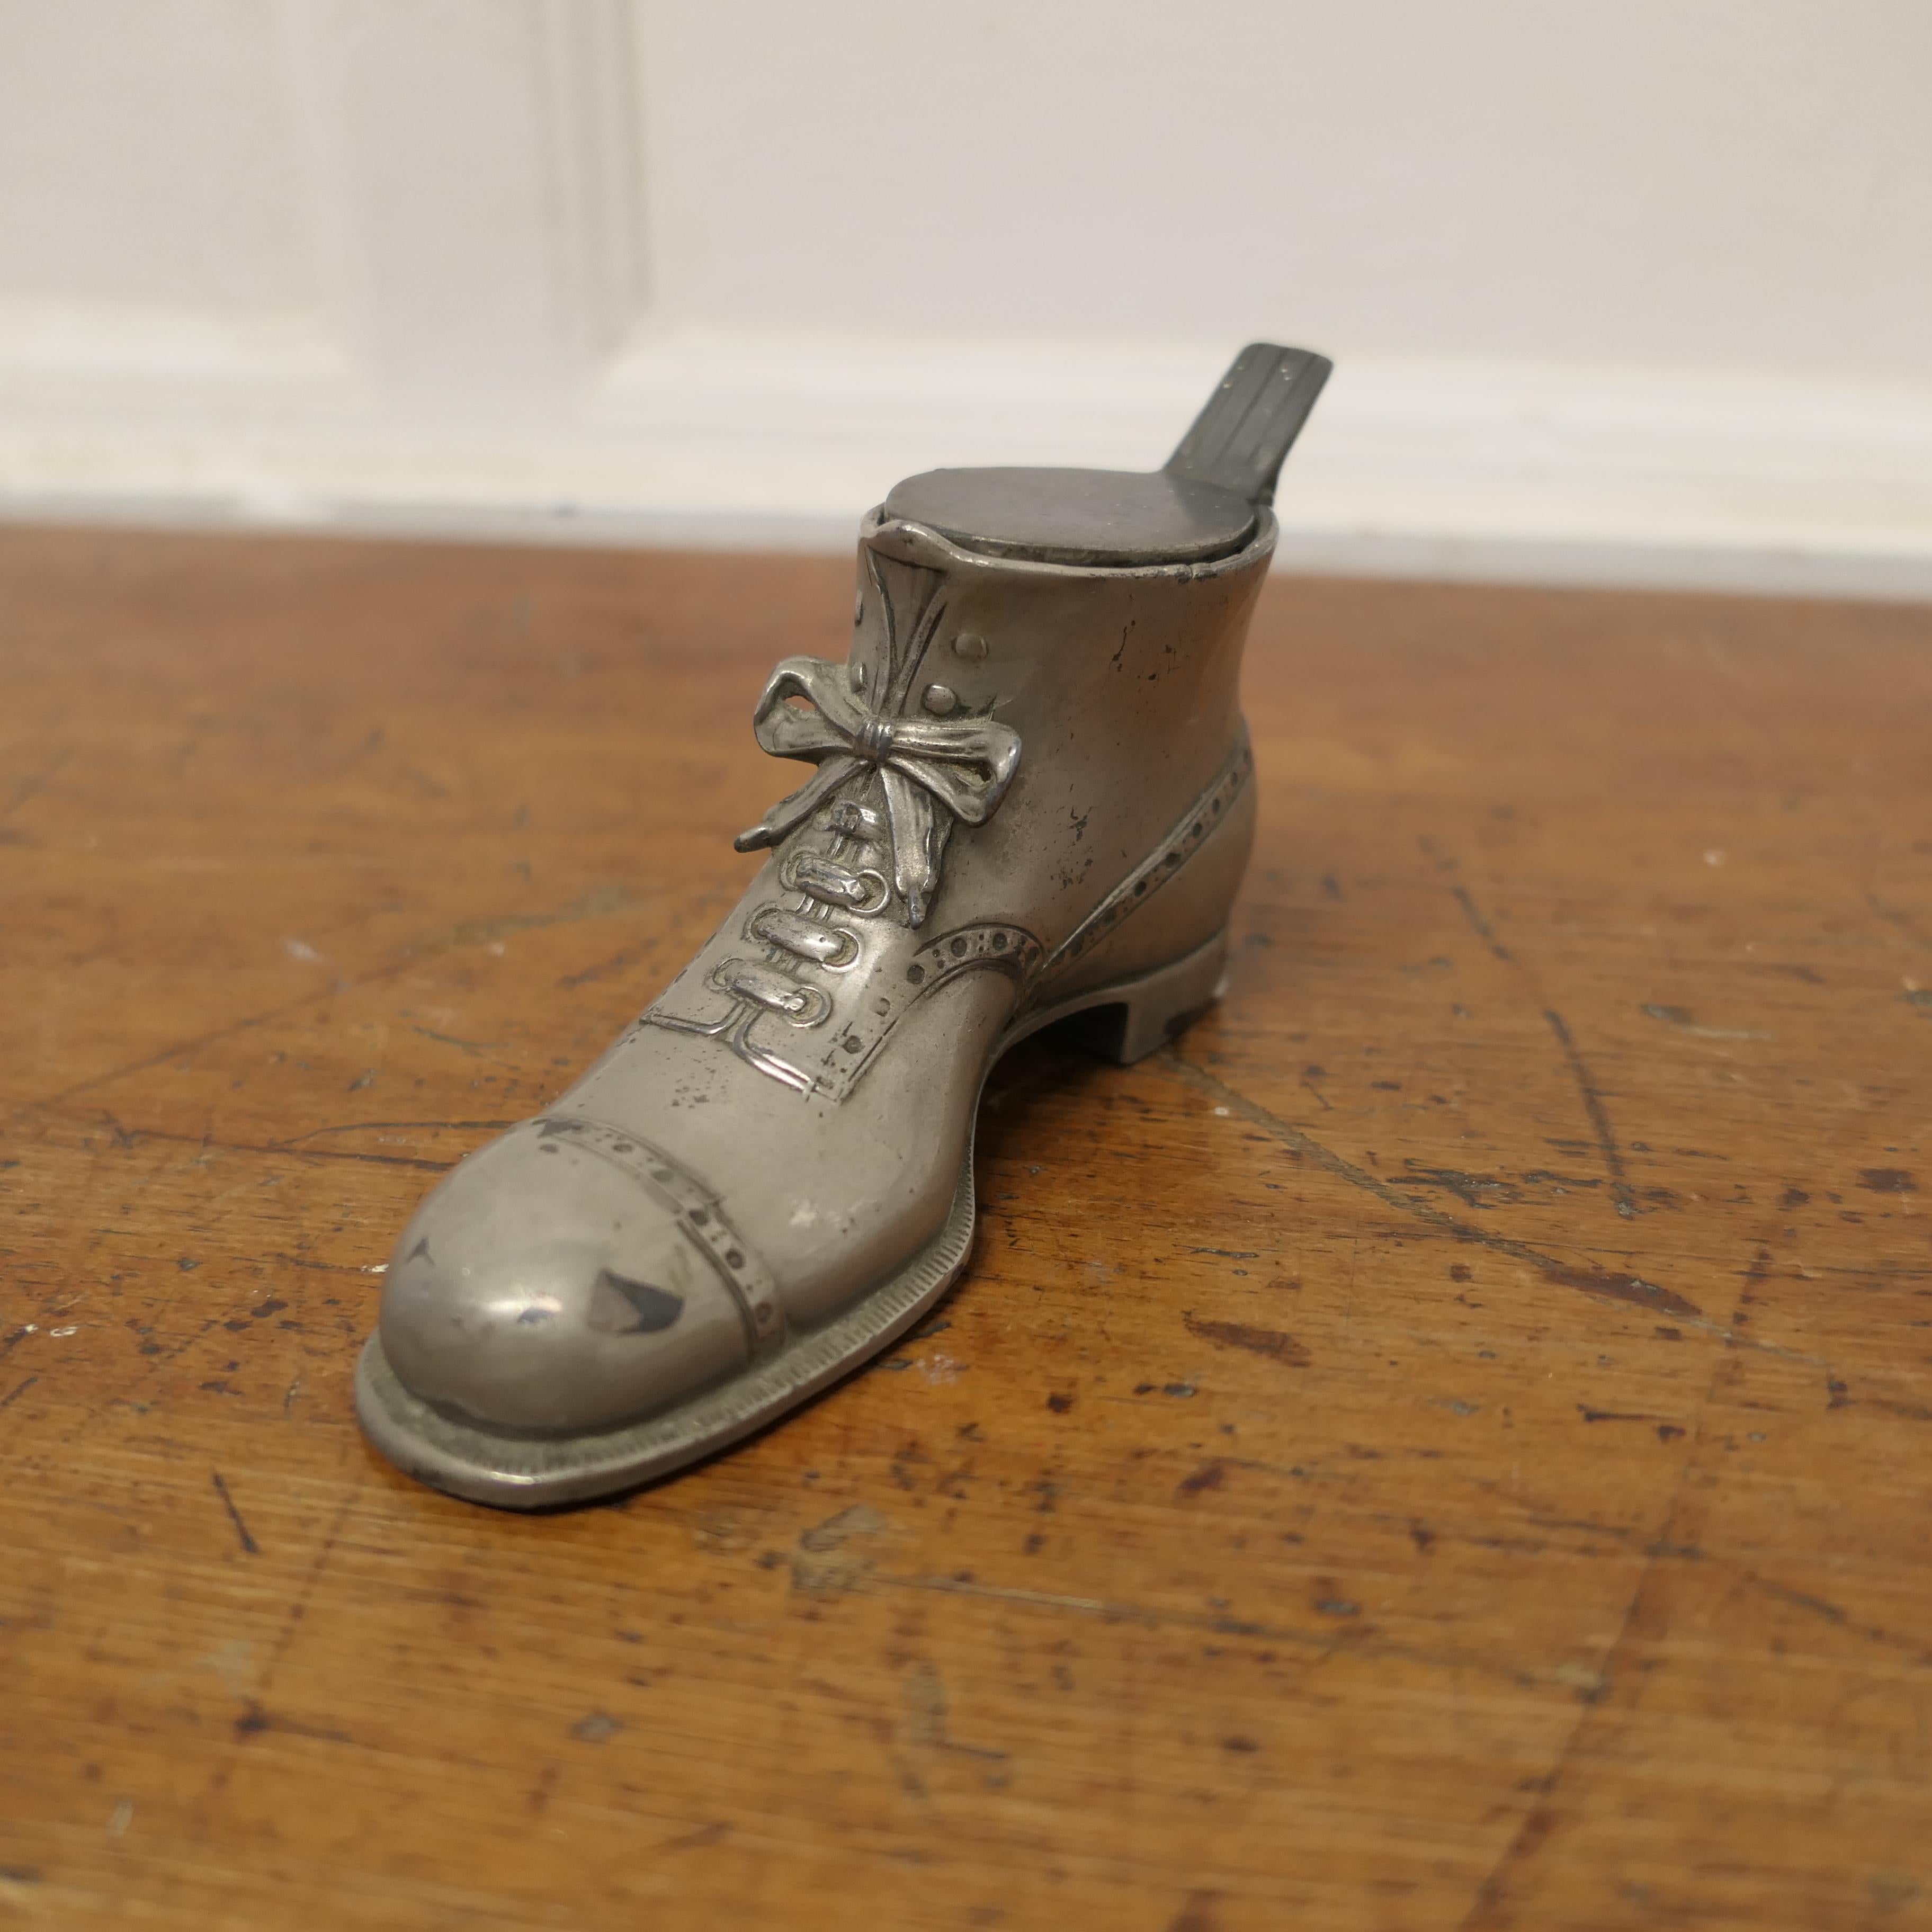 Arts and Crafts Hob Nail Boot Shaped Inkwell Stand   This is a quirky desk top inkwell  For Sale